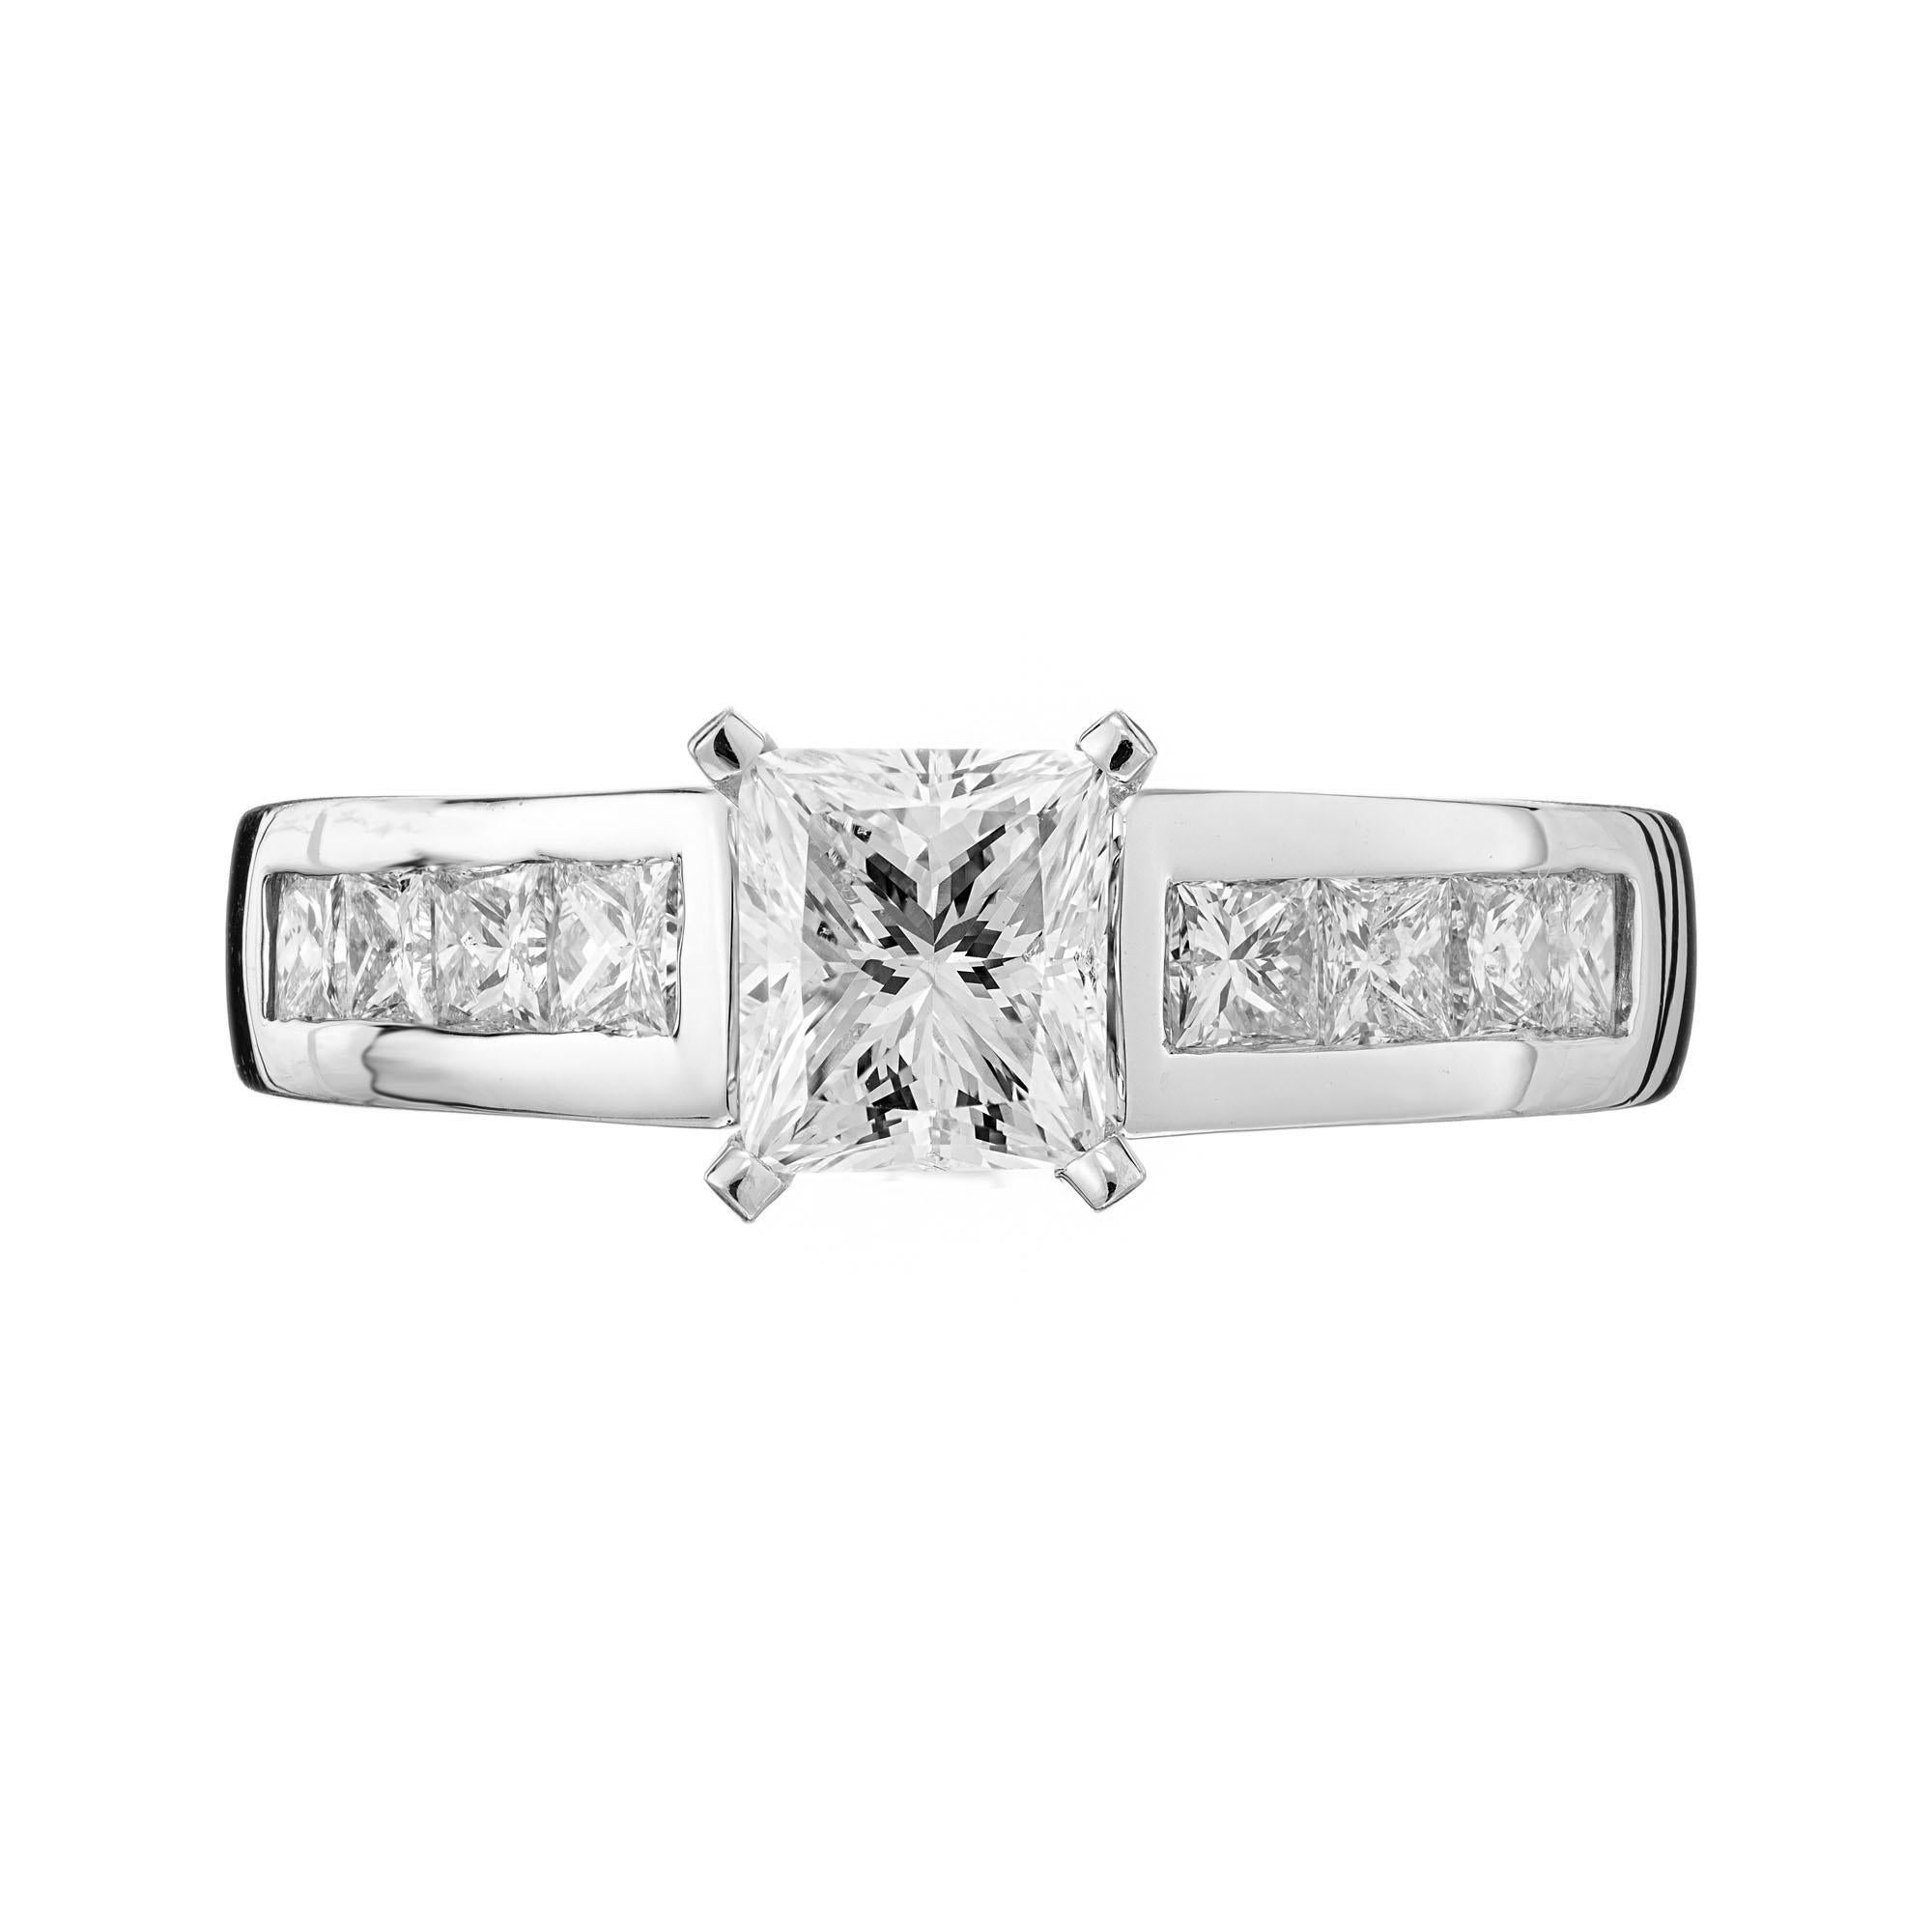 Diamond engagement ring. GIA certified princess cut center diamond in a 14k white gold setting with 8 channel set princess cut side diamonds.

1 princess cut diamond, E SI approx. .88cts GIA Certificate # 2211159543
8 princess cut diamonds, F-G SI